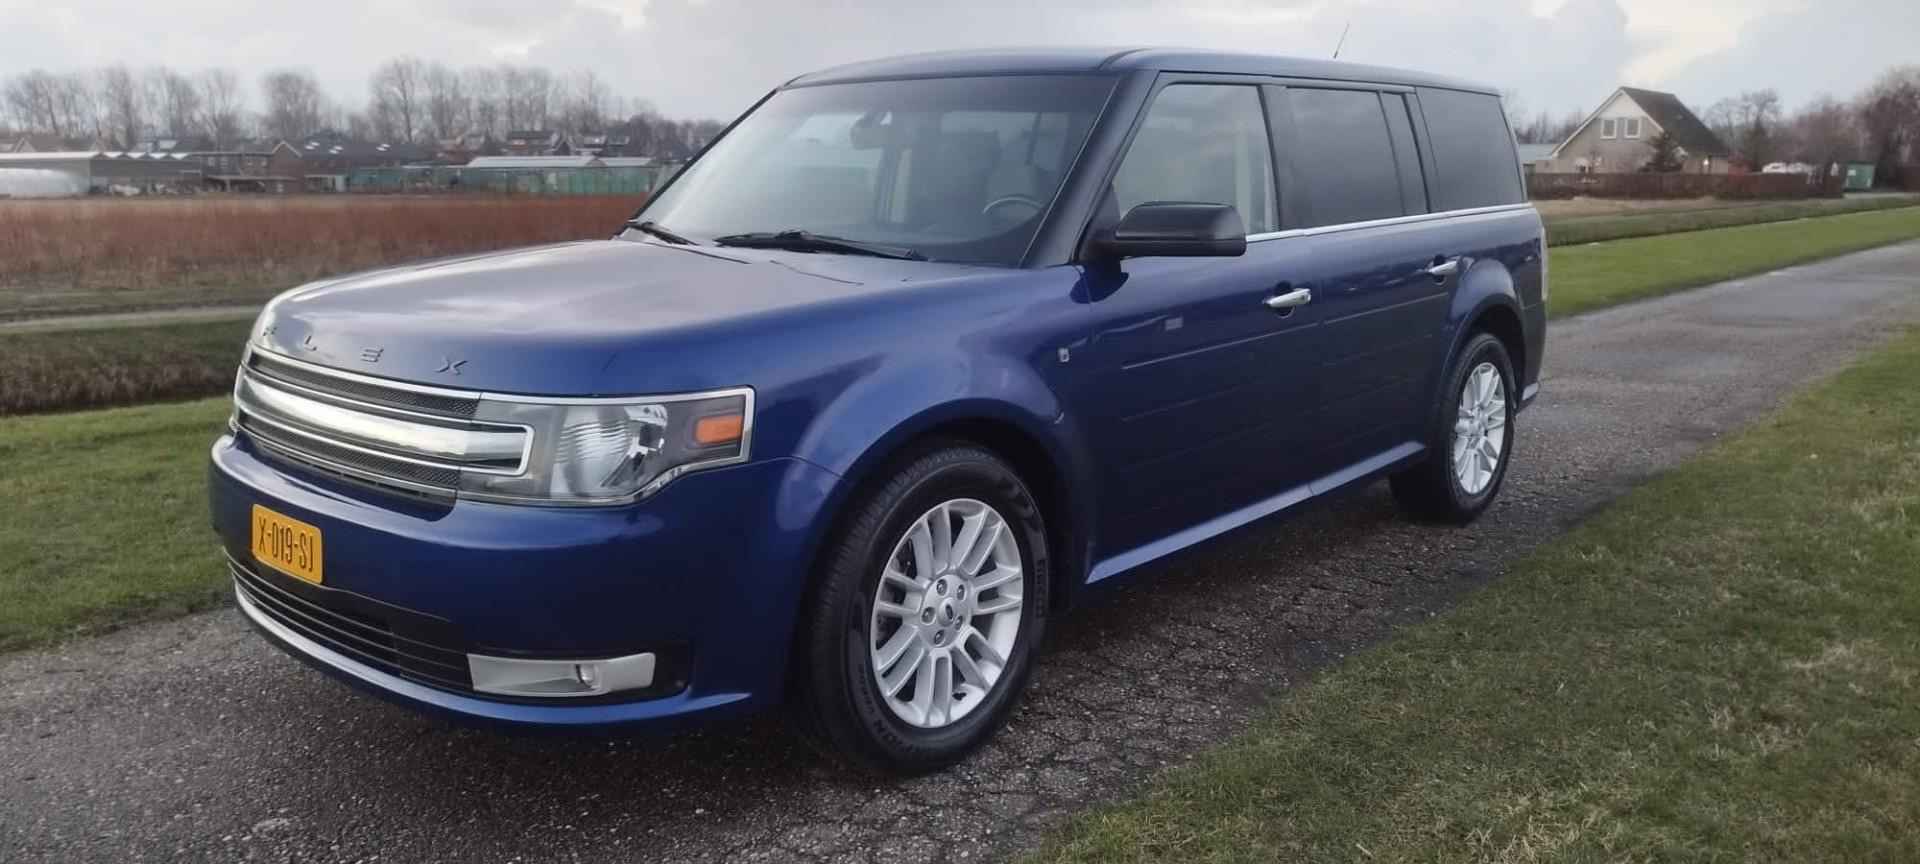 Ford FLEX 3.5 SEL AWD 7-persoons 41000 km! - 1/23